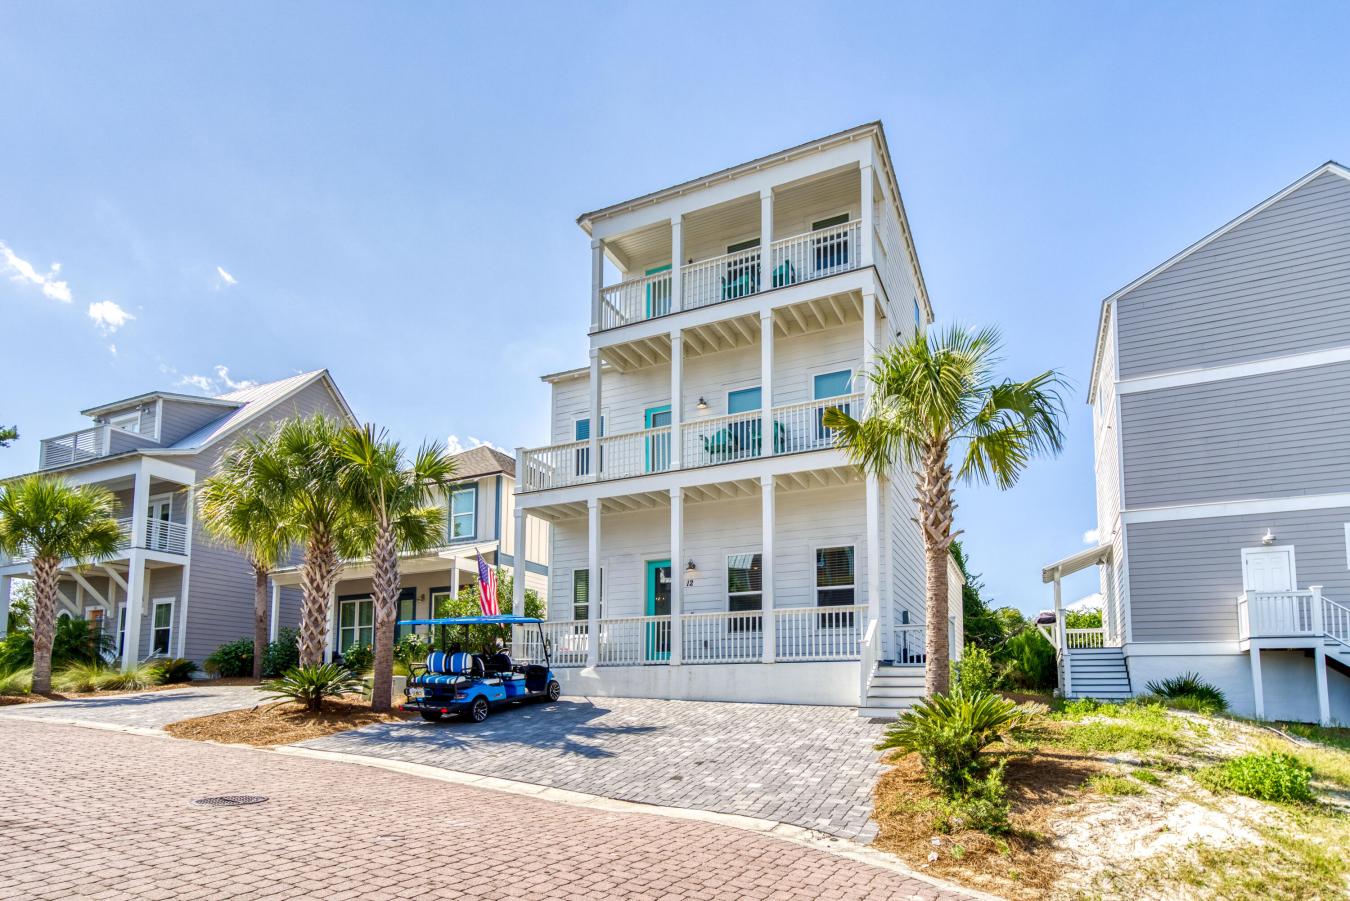 12 Clear, Santa Rosa Beach, Florida, 32459, United States, 3 Bedrooms Bedrooms, ,4 BathroomsBathrooms,Residential,For Sale,12 Clear,1492469